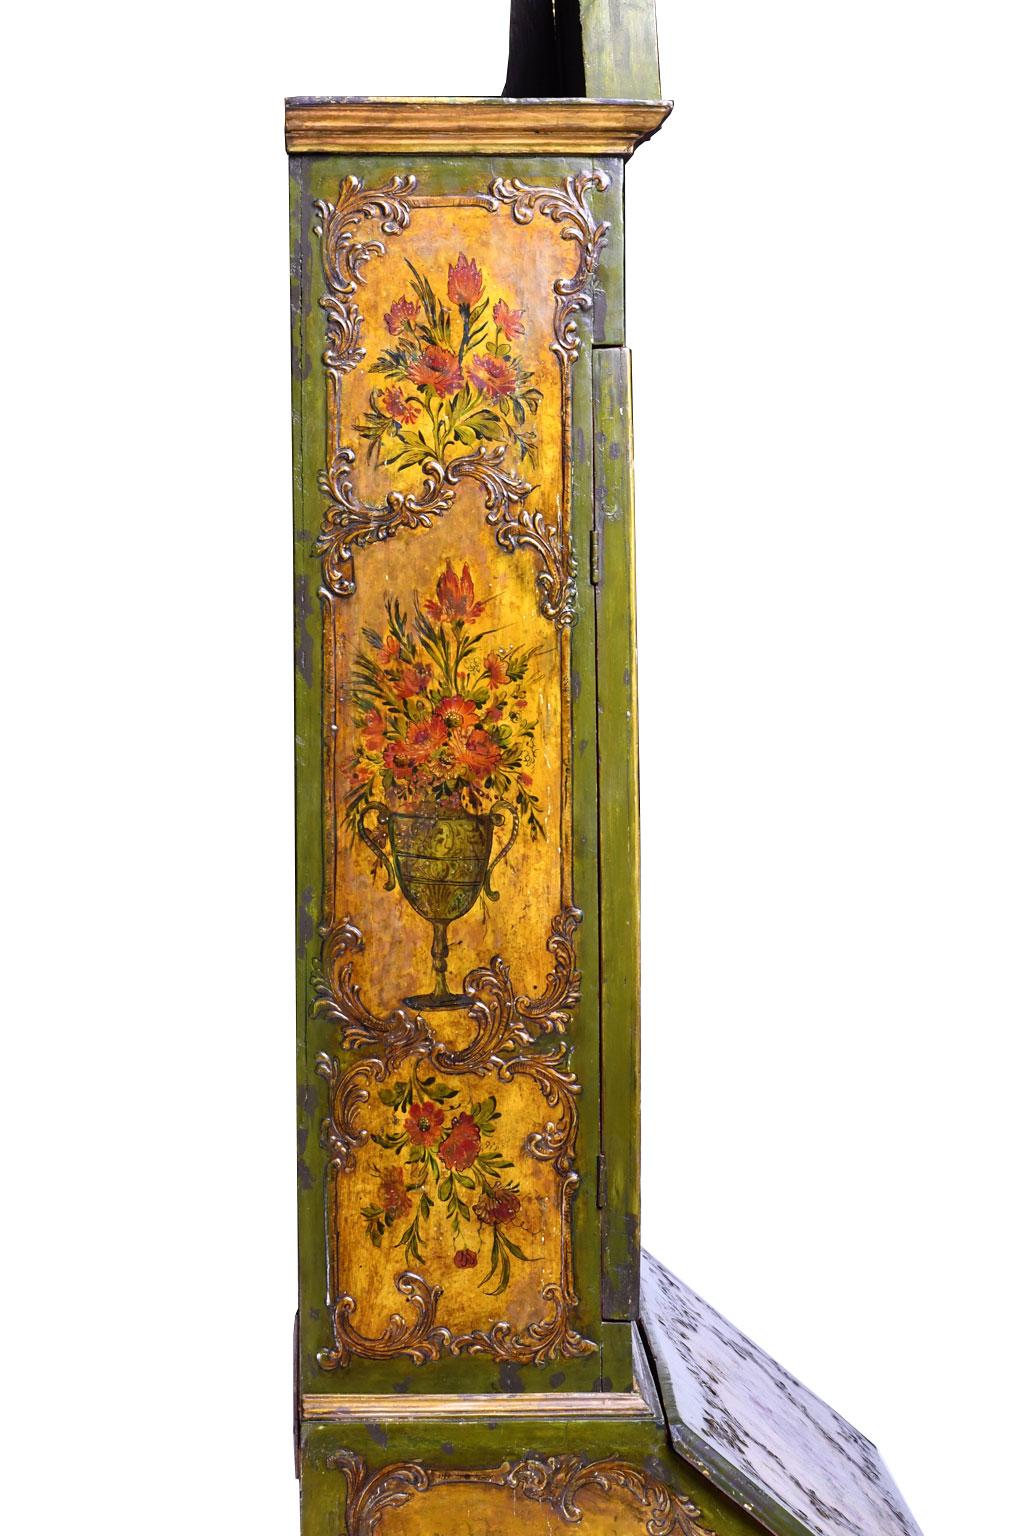 19th Century Venetian Secretary Bookcase with Painted Scenes and Floral Sprays For Sale 11